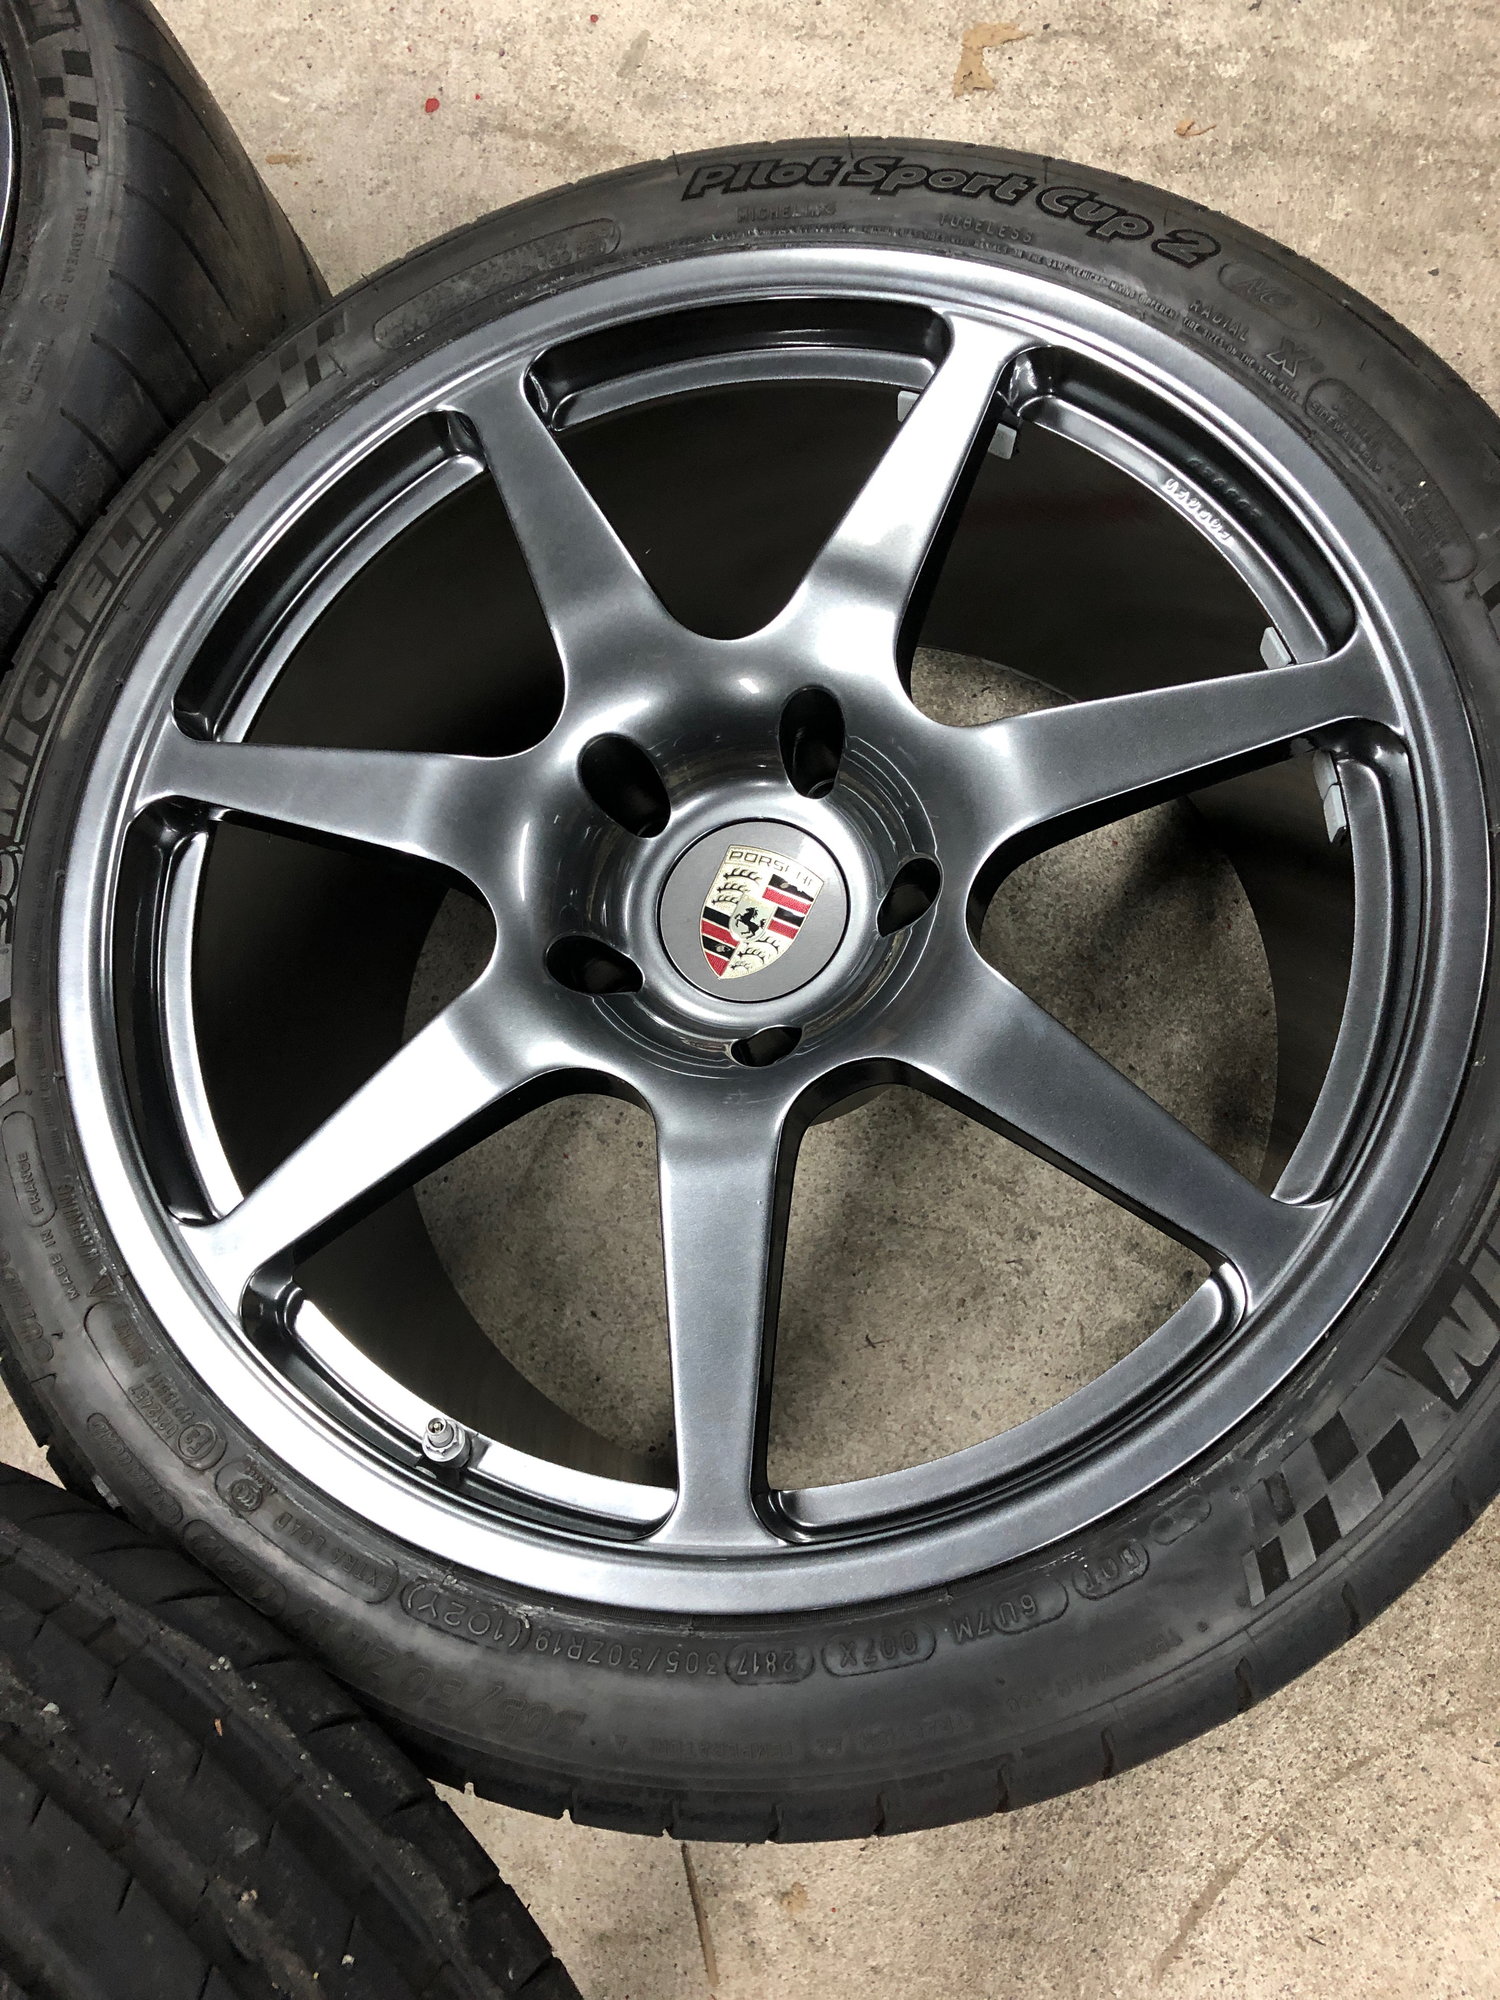 Wheels and Tires/Axles - FS: MINT / Champion GP7 Wheels / Lightweight / Forged / Michelin Cup 2 / TPMS - Used - 0  All Models - Lansdale, PA 19446, United States